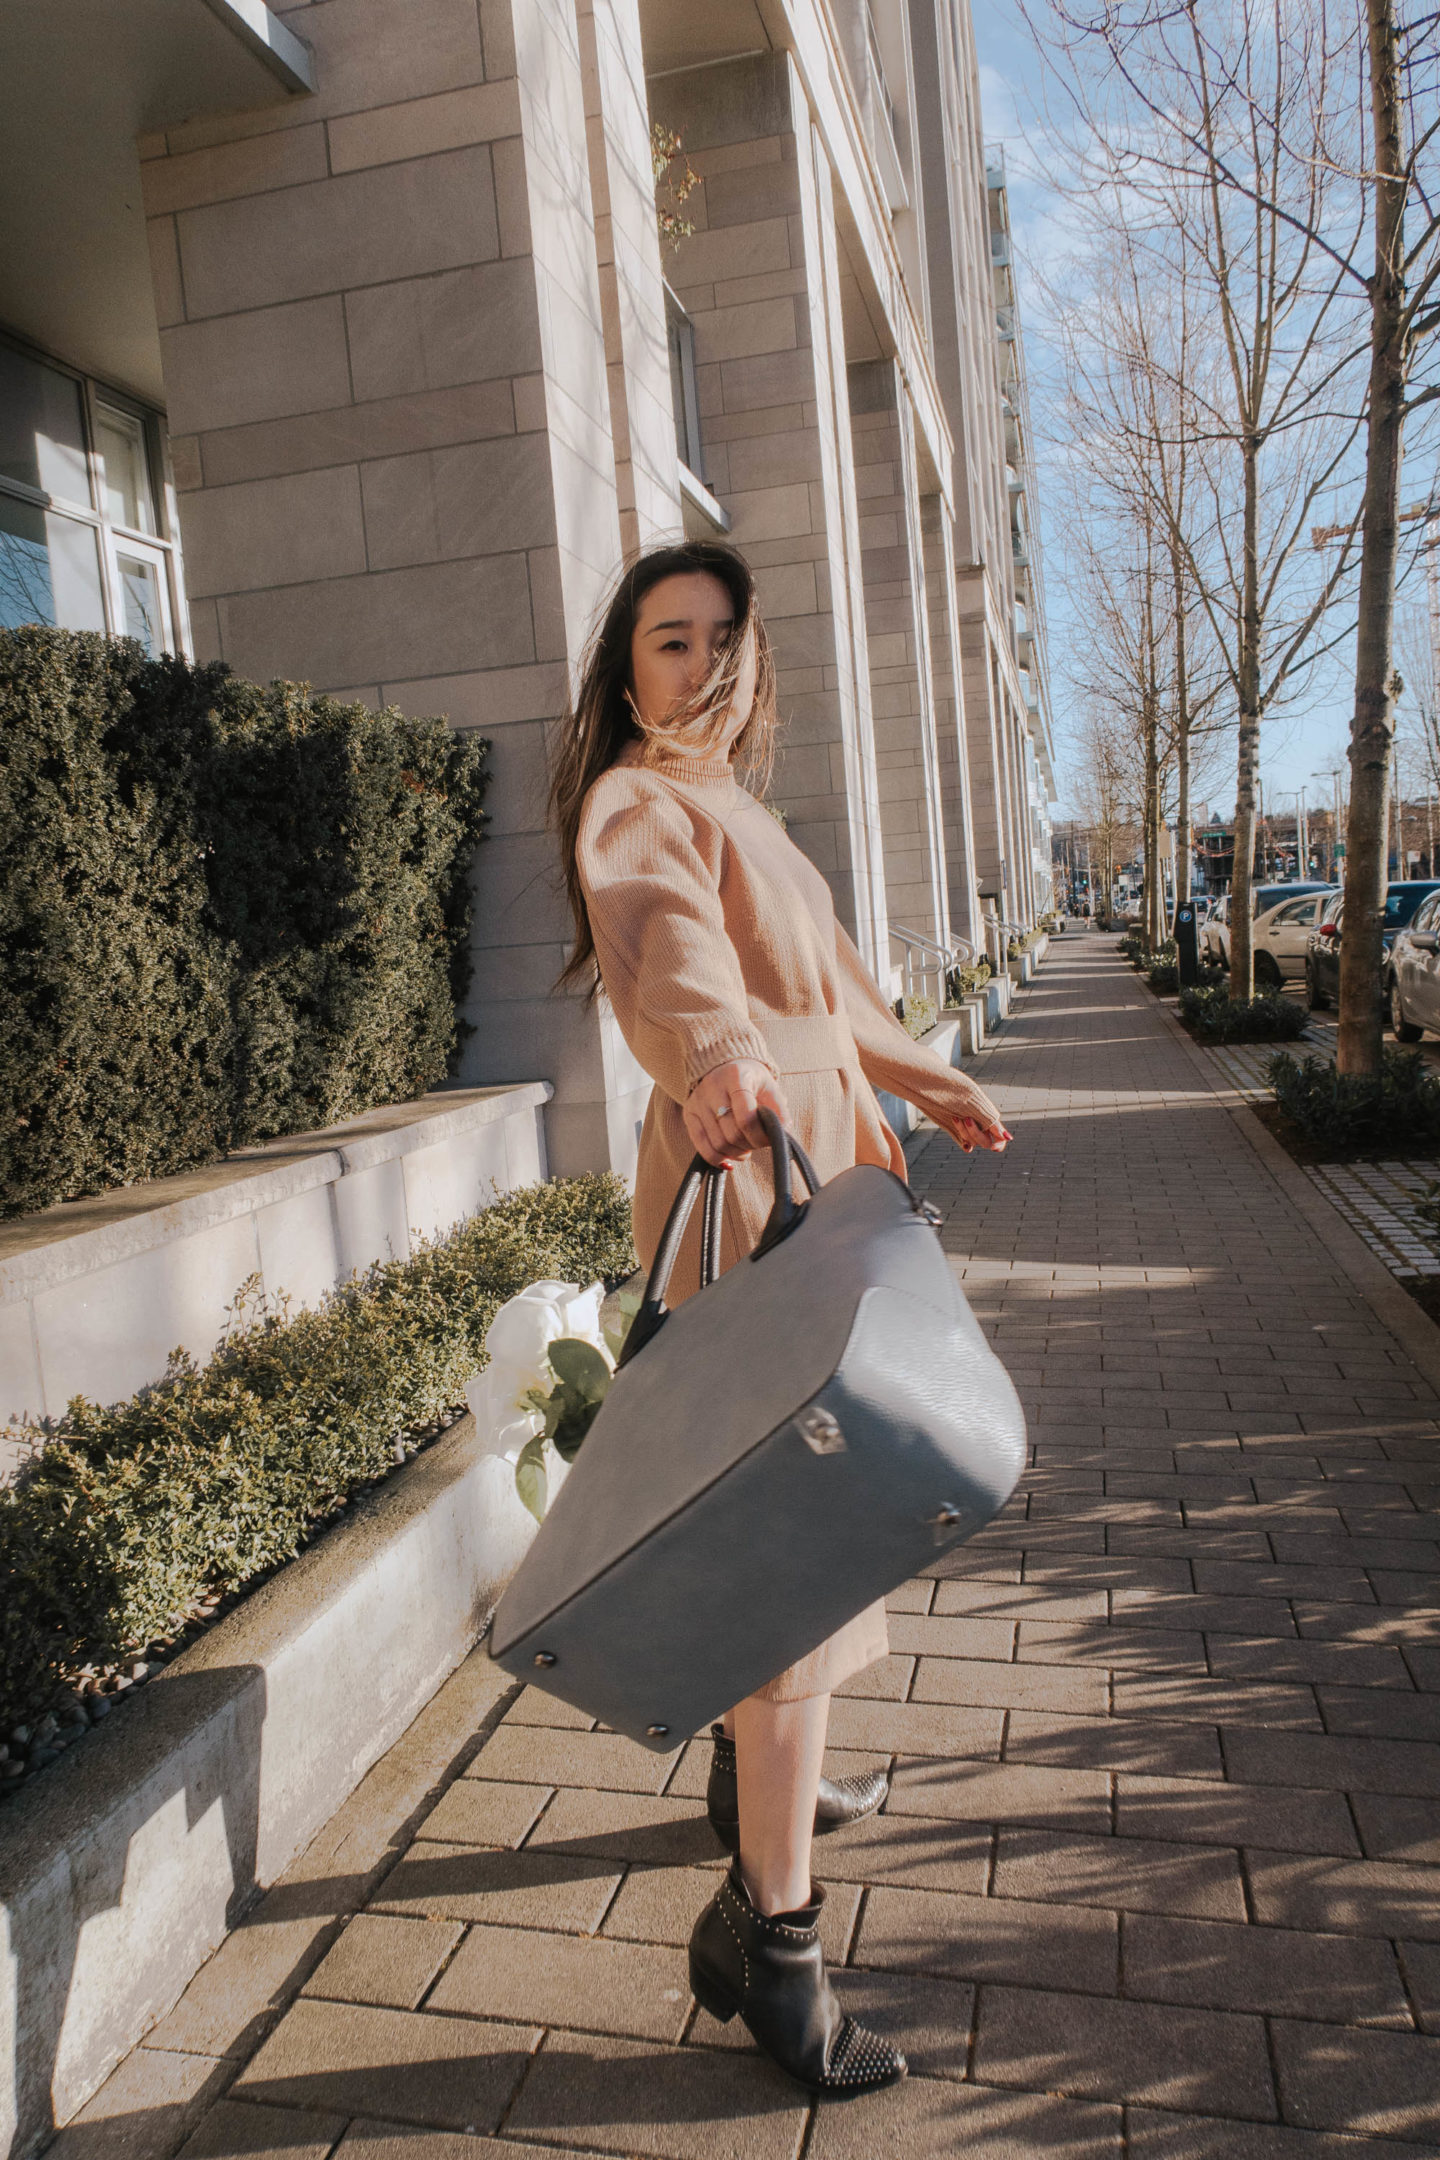 Transition winter to spring wardrobe with a new bag